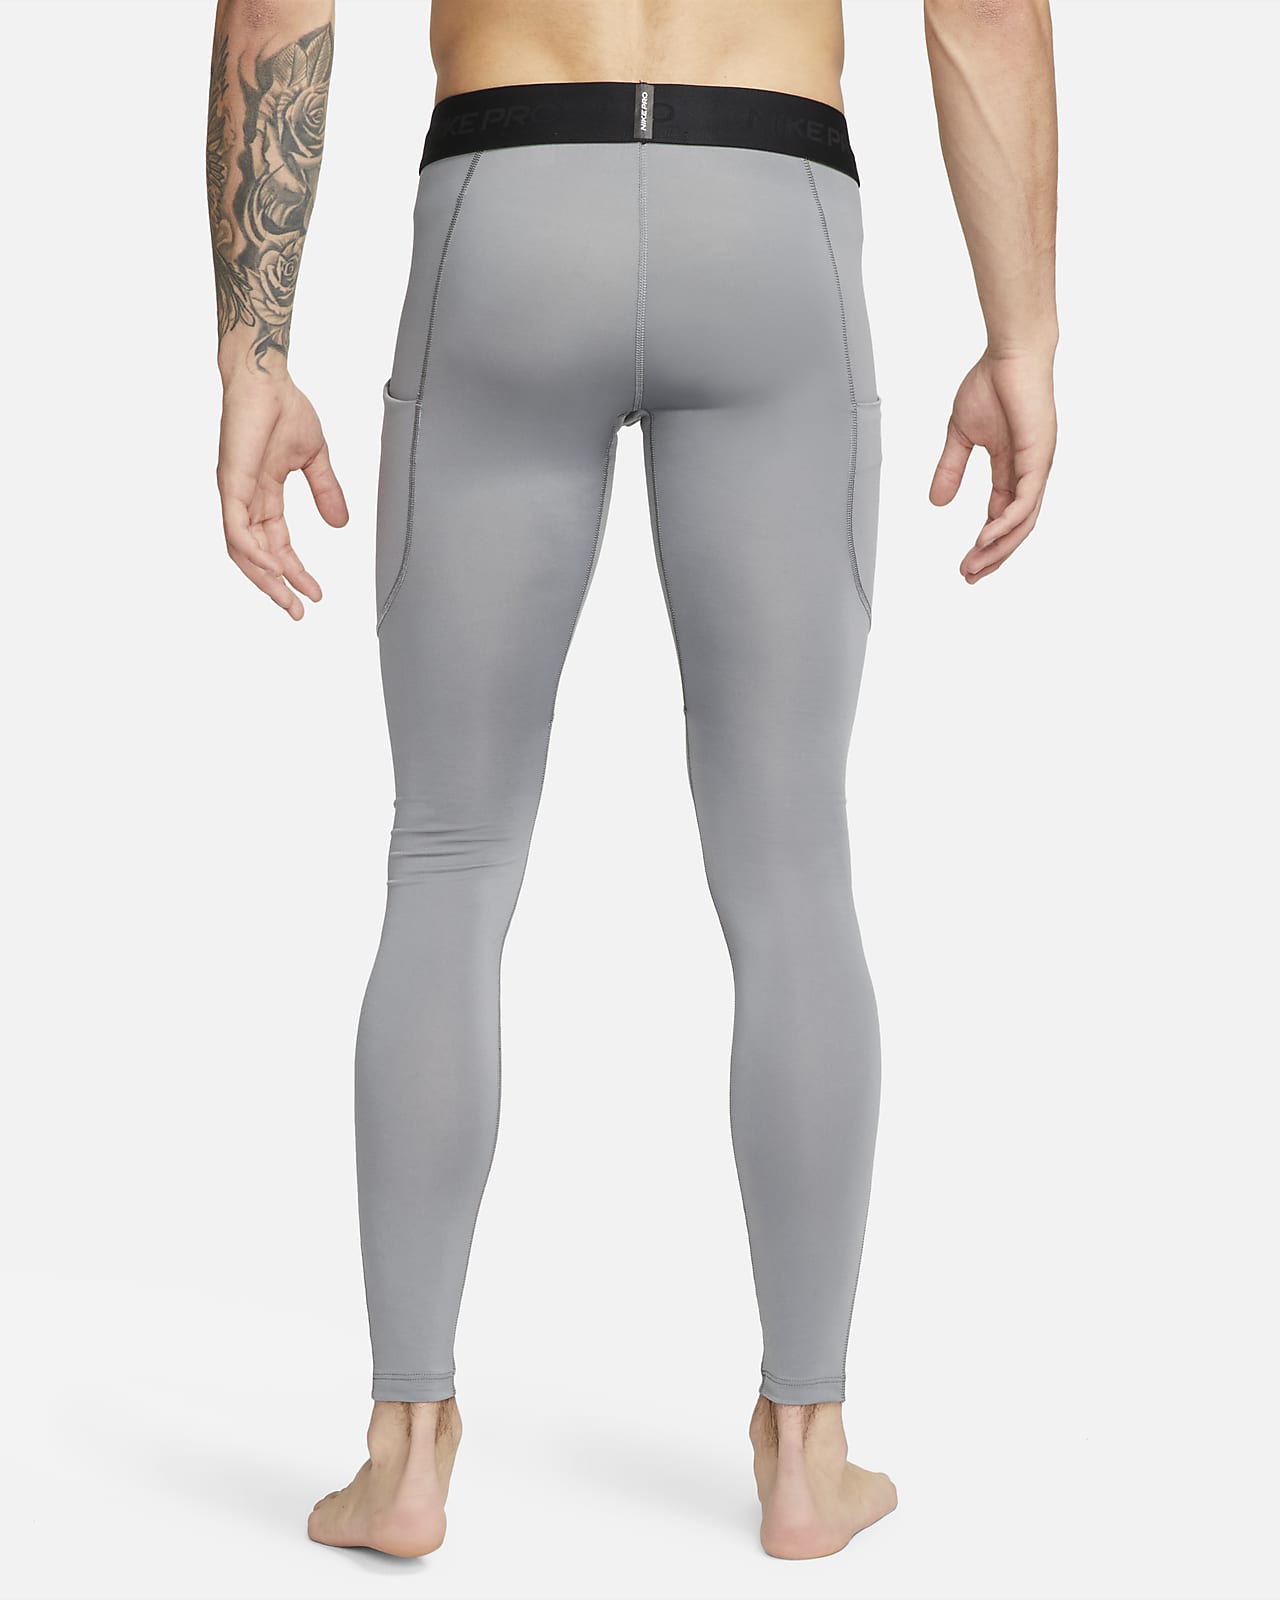 https://static.nike.com/a/images/t_PDP_1280_v1/f_auto,q_auto:eco/82c5c0ea-46dd-4440-a7bb-d0a7bf8c07aa/pro-dri-fit-fitness-tights-7tpSpV.png